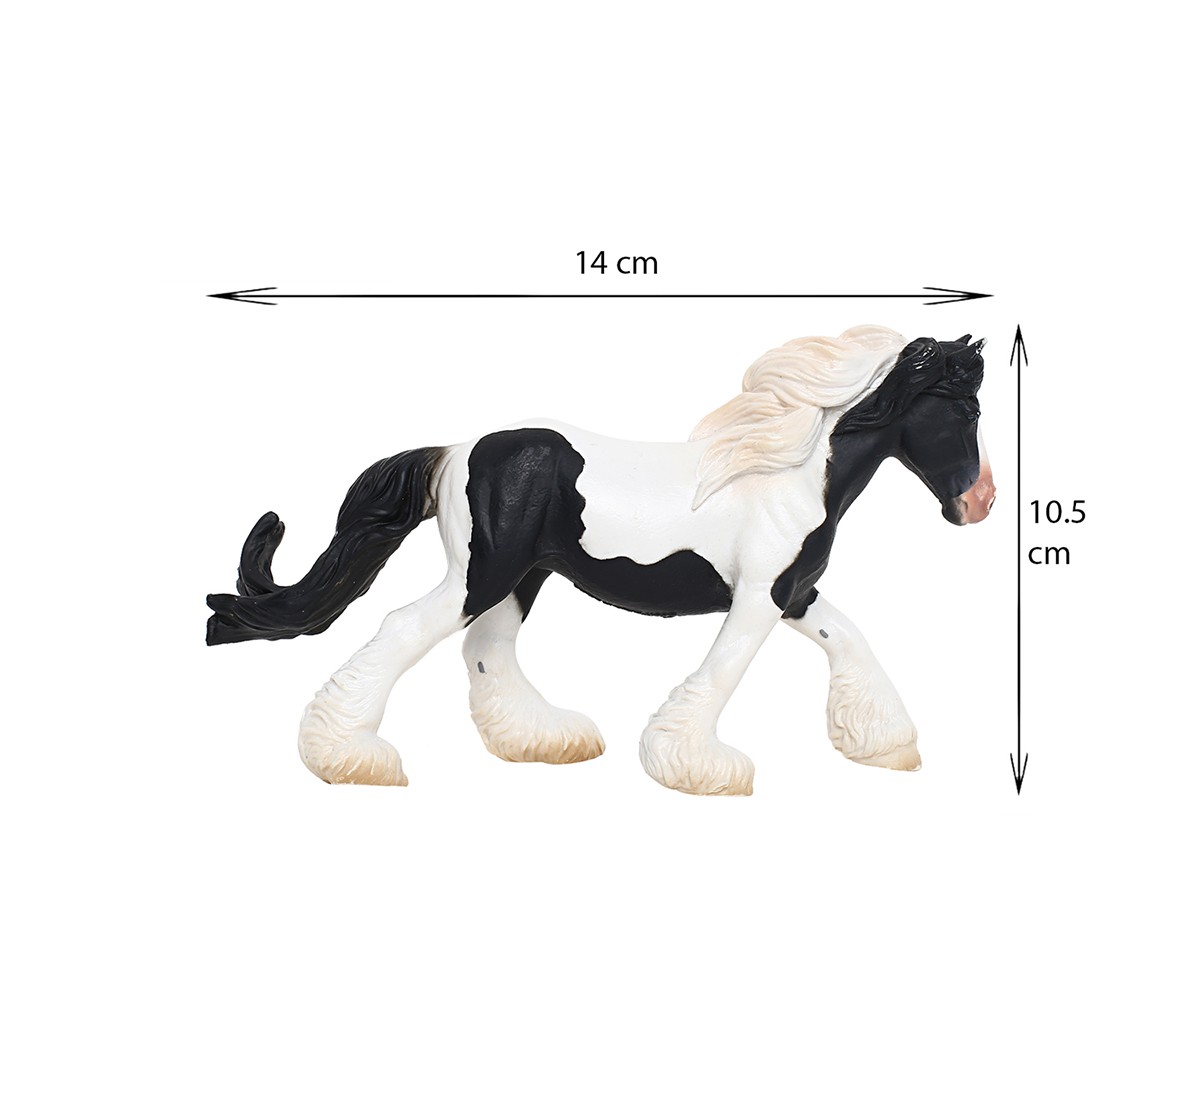 Collecta Gypsy Mare B&W Piebald Animal Figure for Kids age 3Y+ 